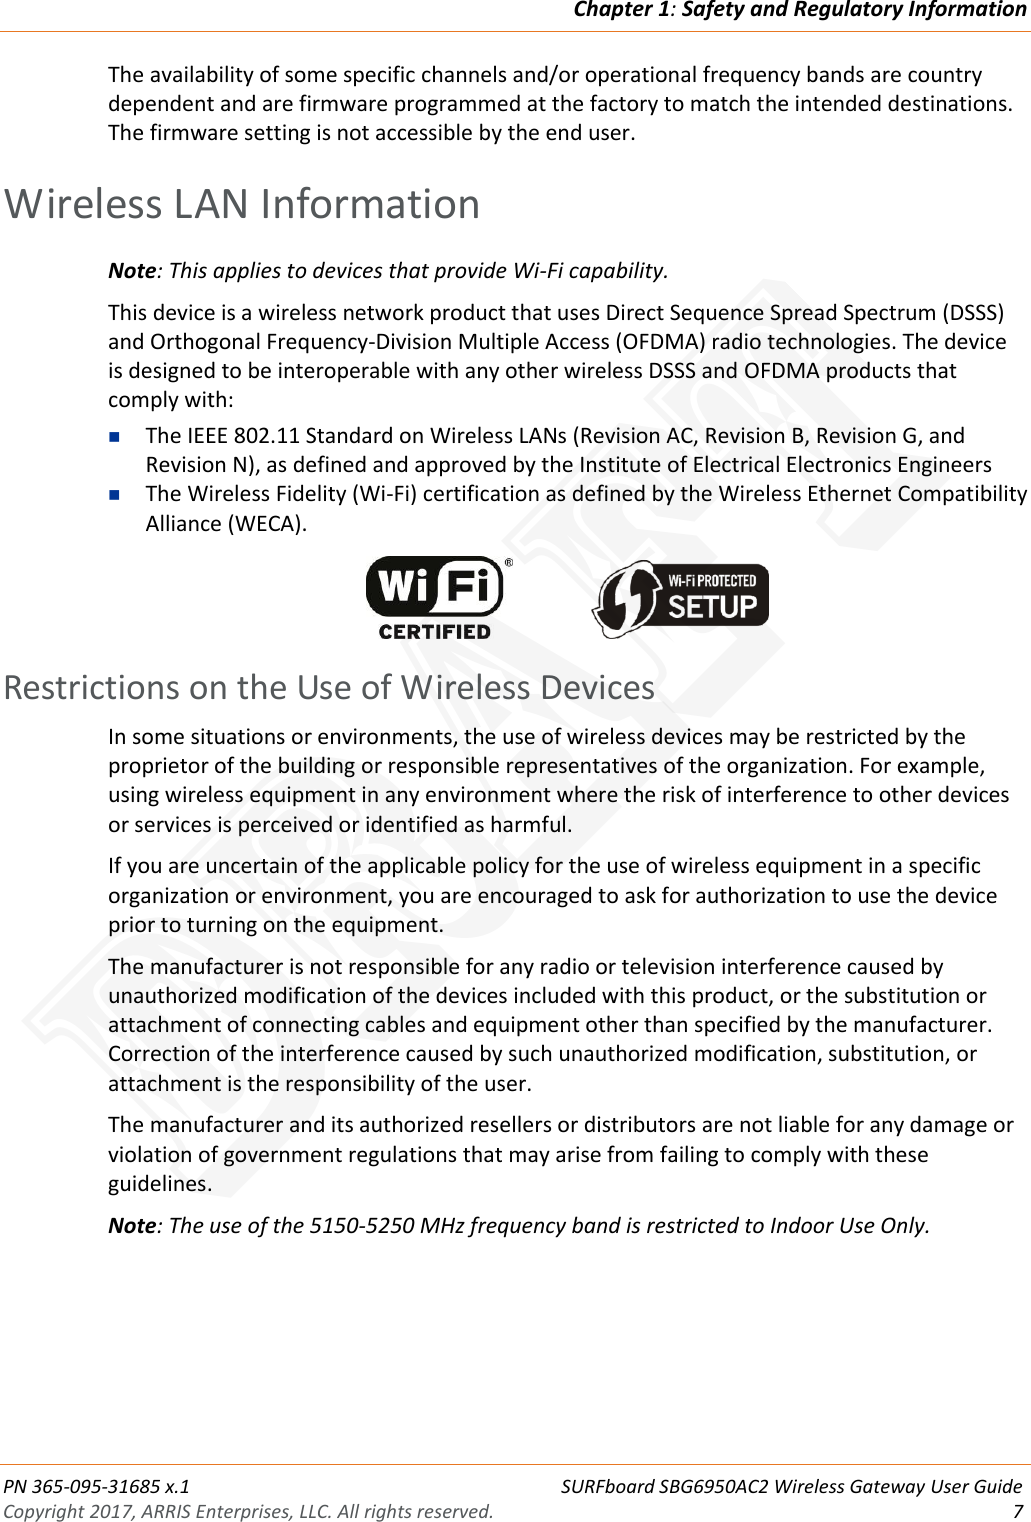 Chapter 1: Safety and Regulatory Information  PN 365-095-31685 x.1 SURFboard SBG6950AC2 Wireless Gateway User Guide Copyright 2017, ARRIS Enterprises, LLC. All rights reserved.  7  The availability of some specific channels and/or operational frequency bands are country dependent and are firmware programmed at the factory to match the intended destinations. The firmware setting is not accessible by the end user.   Wireless LAN Information Note: This applies to devices that provide Wi-Fi capability. This device is a wireless network product that uses Direct Sequence Spread Spectrum (DSSS) and Orthogonal Frequency-Division Multiple Access (OFDMA) radio technologies. The device is designed to be interoperable with any other wireless DSSS and OFDMA products that comply with:  The IEEE 802.11 Standard on Wireless LANs (Revision AC, Revision B, Revision G, and Revision N), as defined and approved by the Institute of Electrical Electronics Engineers  The Wireless Fidelity (Wi-Fi) certification as defined by the Wireless Ethernet Compatibility Alliance (WECA).      Restrictions on the Use of Wireless Devices In some situations or environments, the use of wireless devices may be restricted by the proprietor of the building or responsible representatives of the organization. For example, using wireless equipment in any environment where the risk of interference to other devices or services is perceived or identified as harmful.  If you are uncertain of the applicable policy for the use of wireless equipment in a specific organization or environment, you are encouraged to ask for authorization to use the device prior to turning on the equipment.  The manufacturer is not responsible for any radio or television interference caused by unauthorized modification of the devices included with this product, or the substitution or attachment of connecting cables and equipment other than specified by the manufacturer. Correction of the interference caused by such unauthorized modification, substitution, or attachment is the responsibility of the user.  The manufacturer and its authorized resellers or distributors are not liable for any damage or violation of government regulations that may arise from failing to comply with these guidelines. Note: The use of the 5150-5250 MHz frequency band is restricted to Indoor Use Only. DRAFT